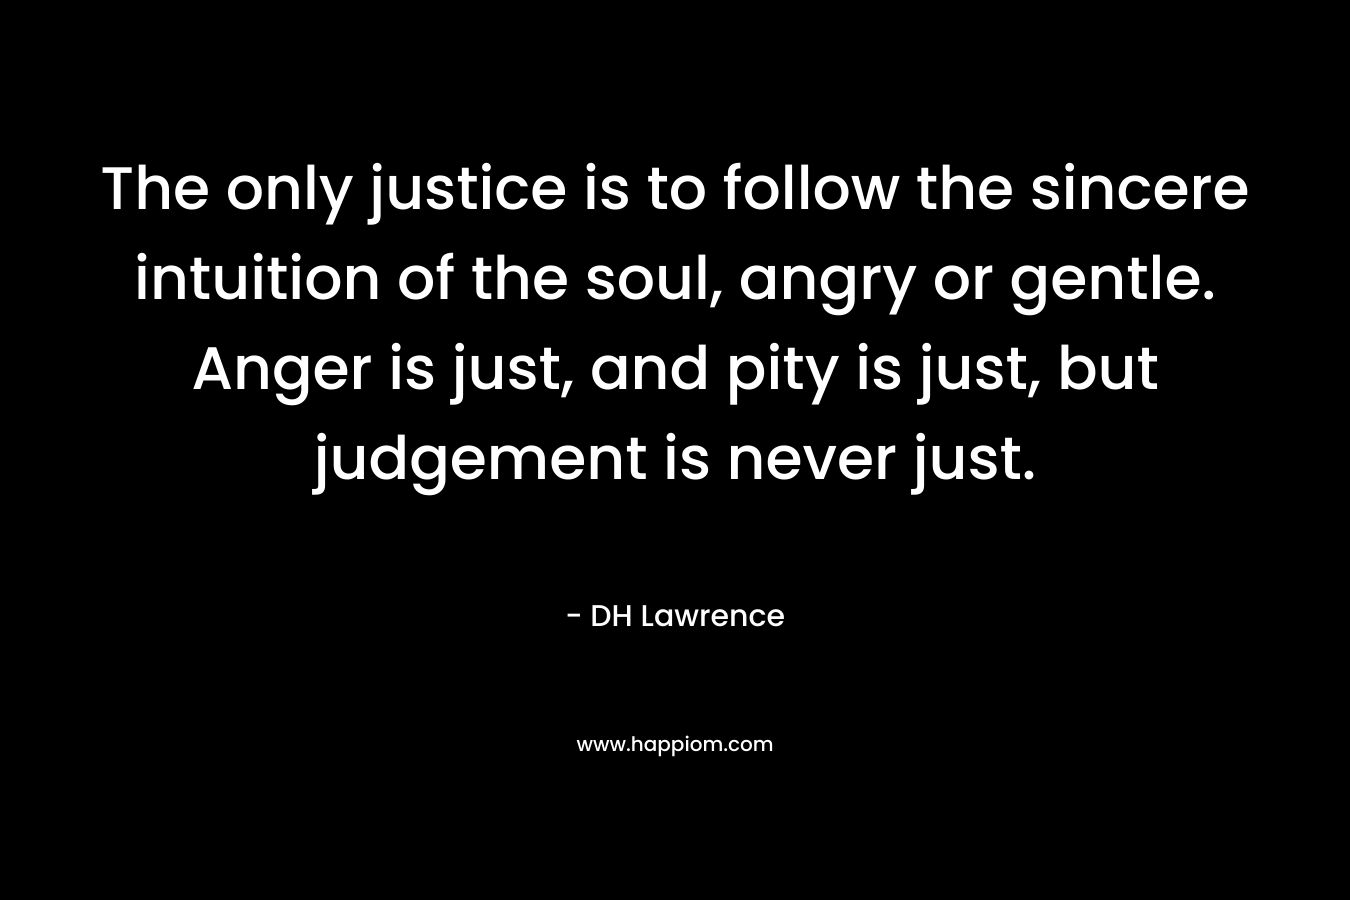 The only justice is to follow the sincere intuition of the soul, angry or gentle. Anger is just, and pity is just, but judgement is never just. – DH Lawrence